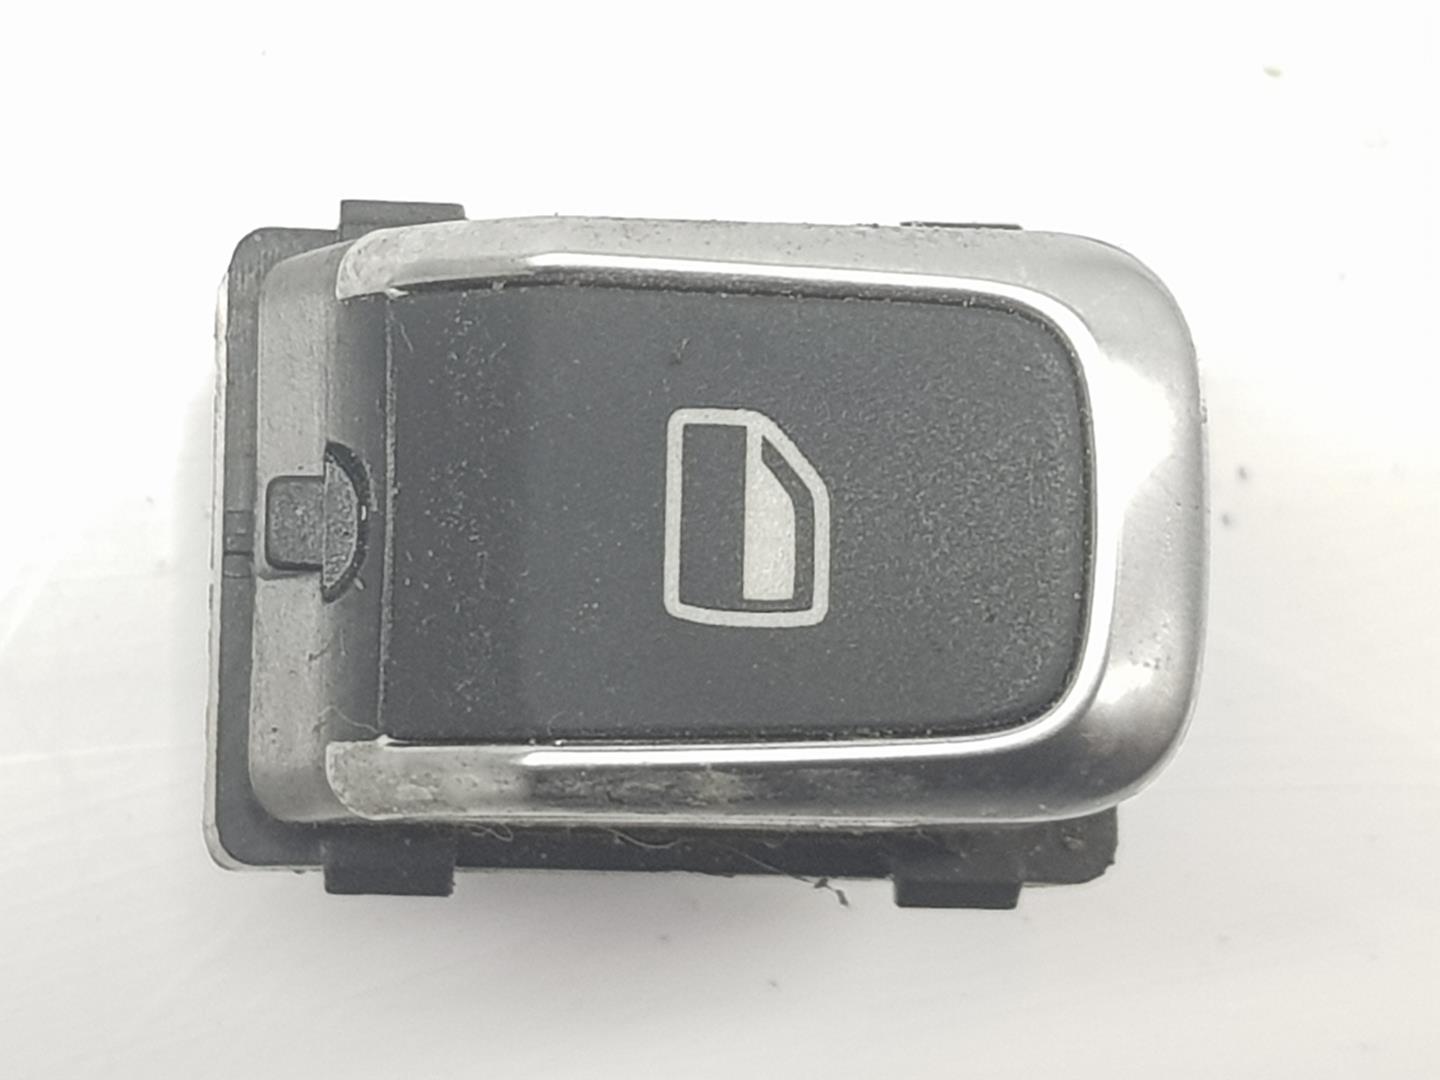 AUDI A7 C7/4G (2010-2020) Rear Right Door Window Control Switch 4H0959855A, 4H0959855A 19803834